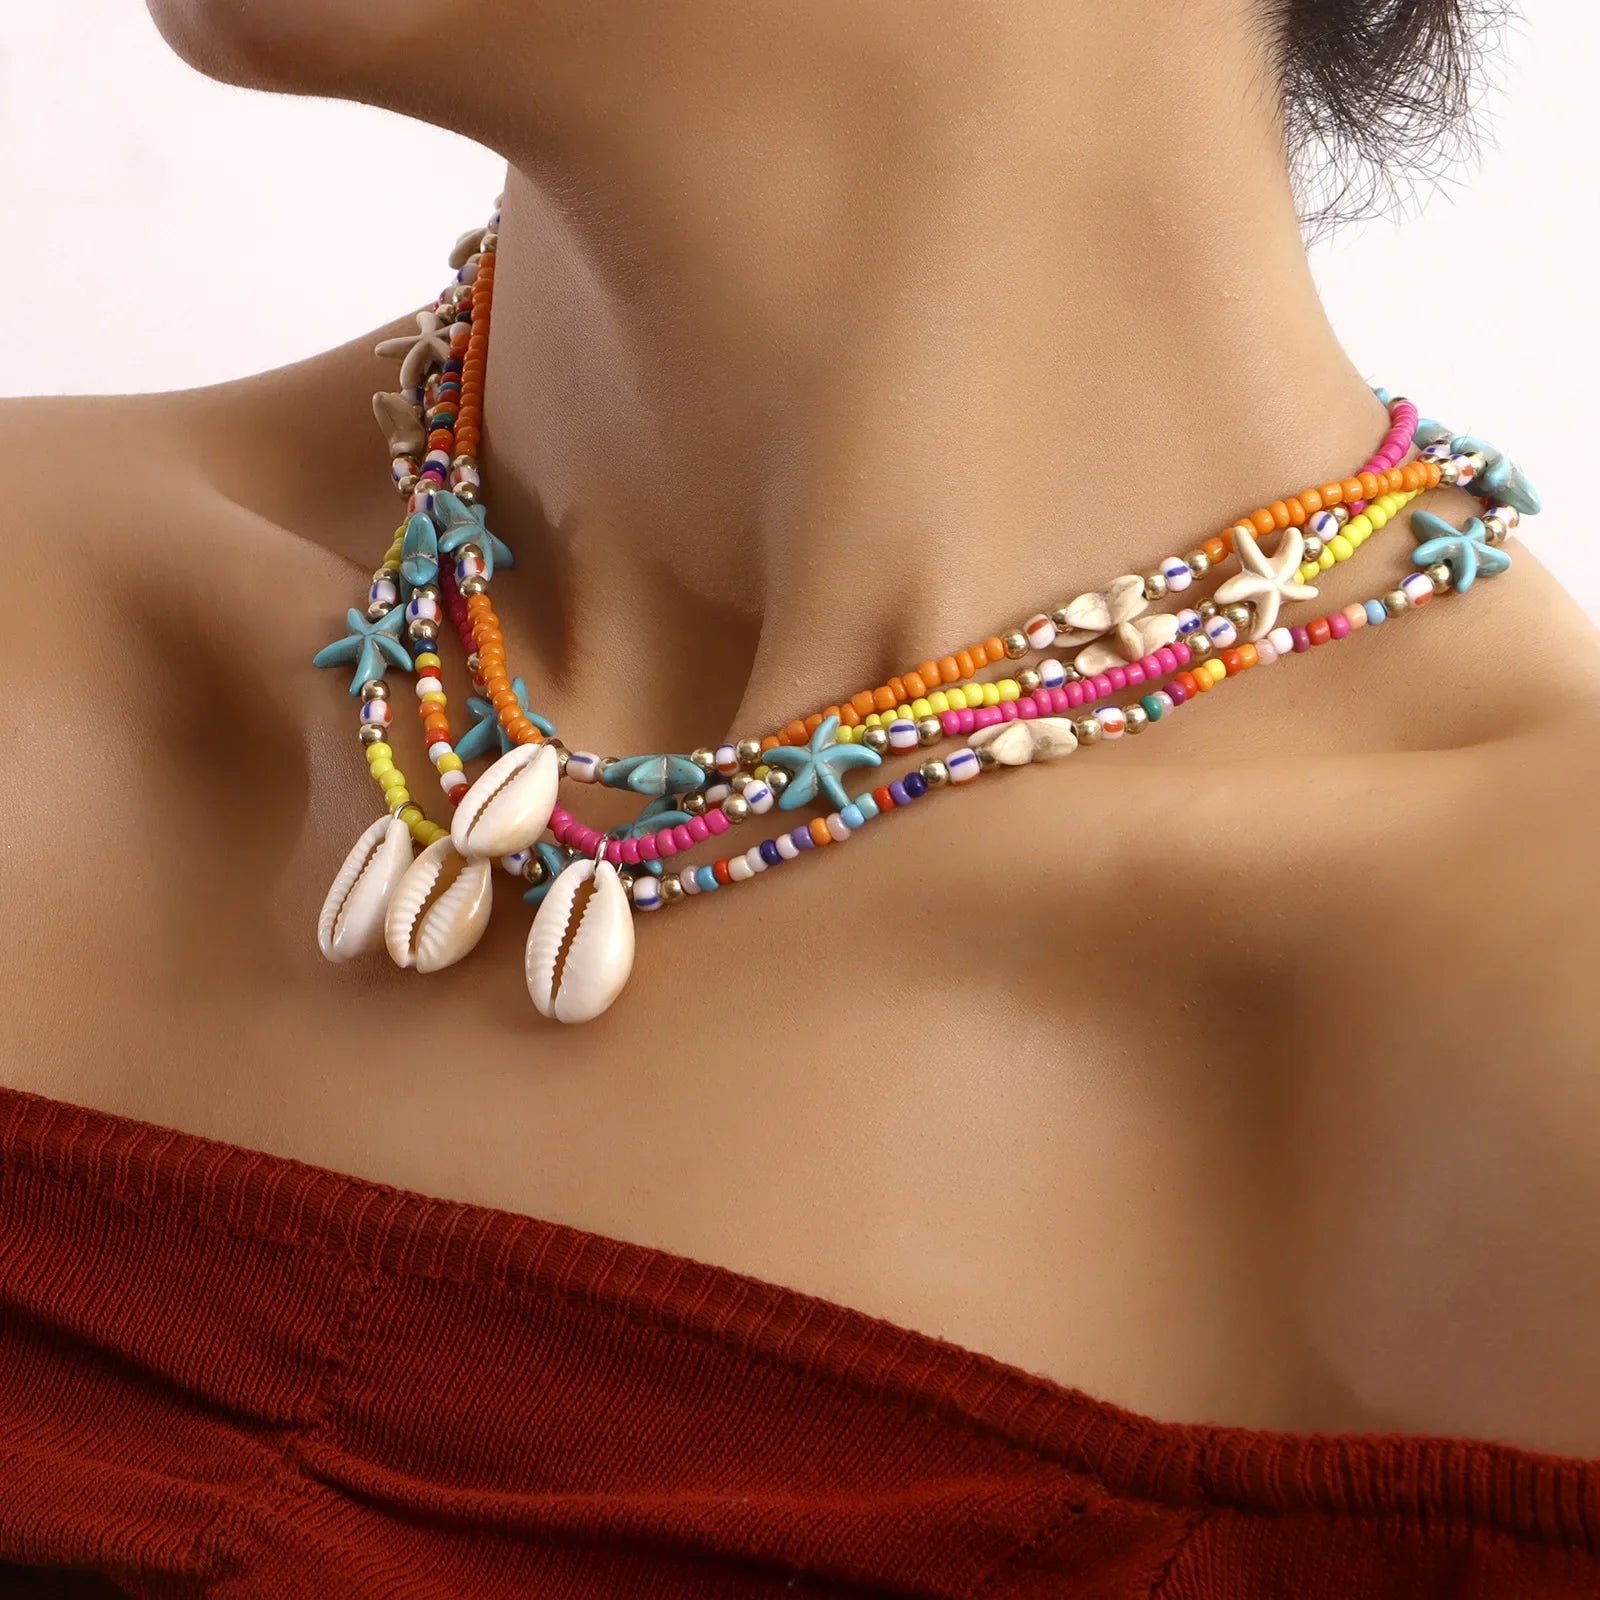 Multilayer Boho Colorful Bead Seashell Chain Necklace - Madeinsea©